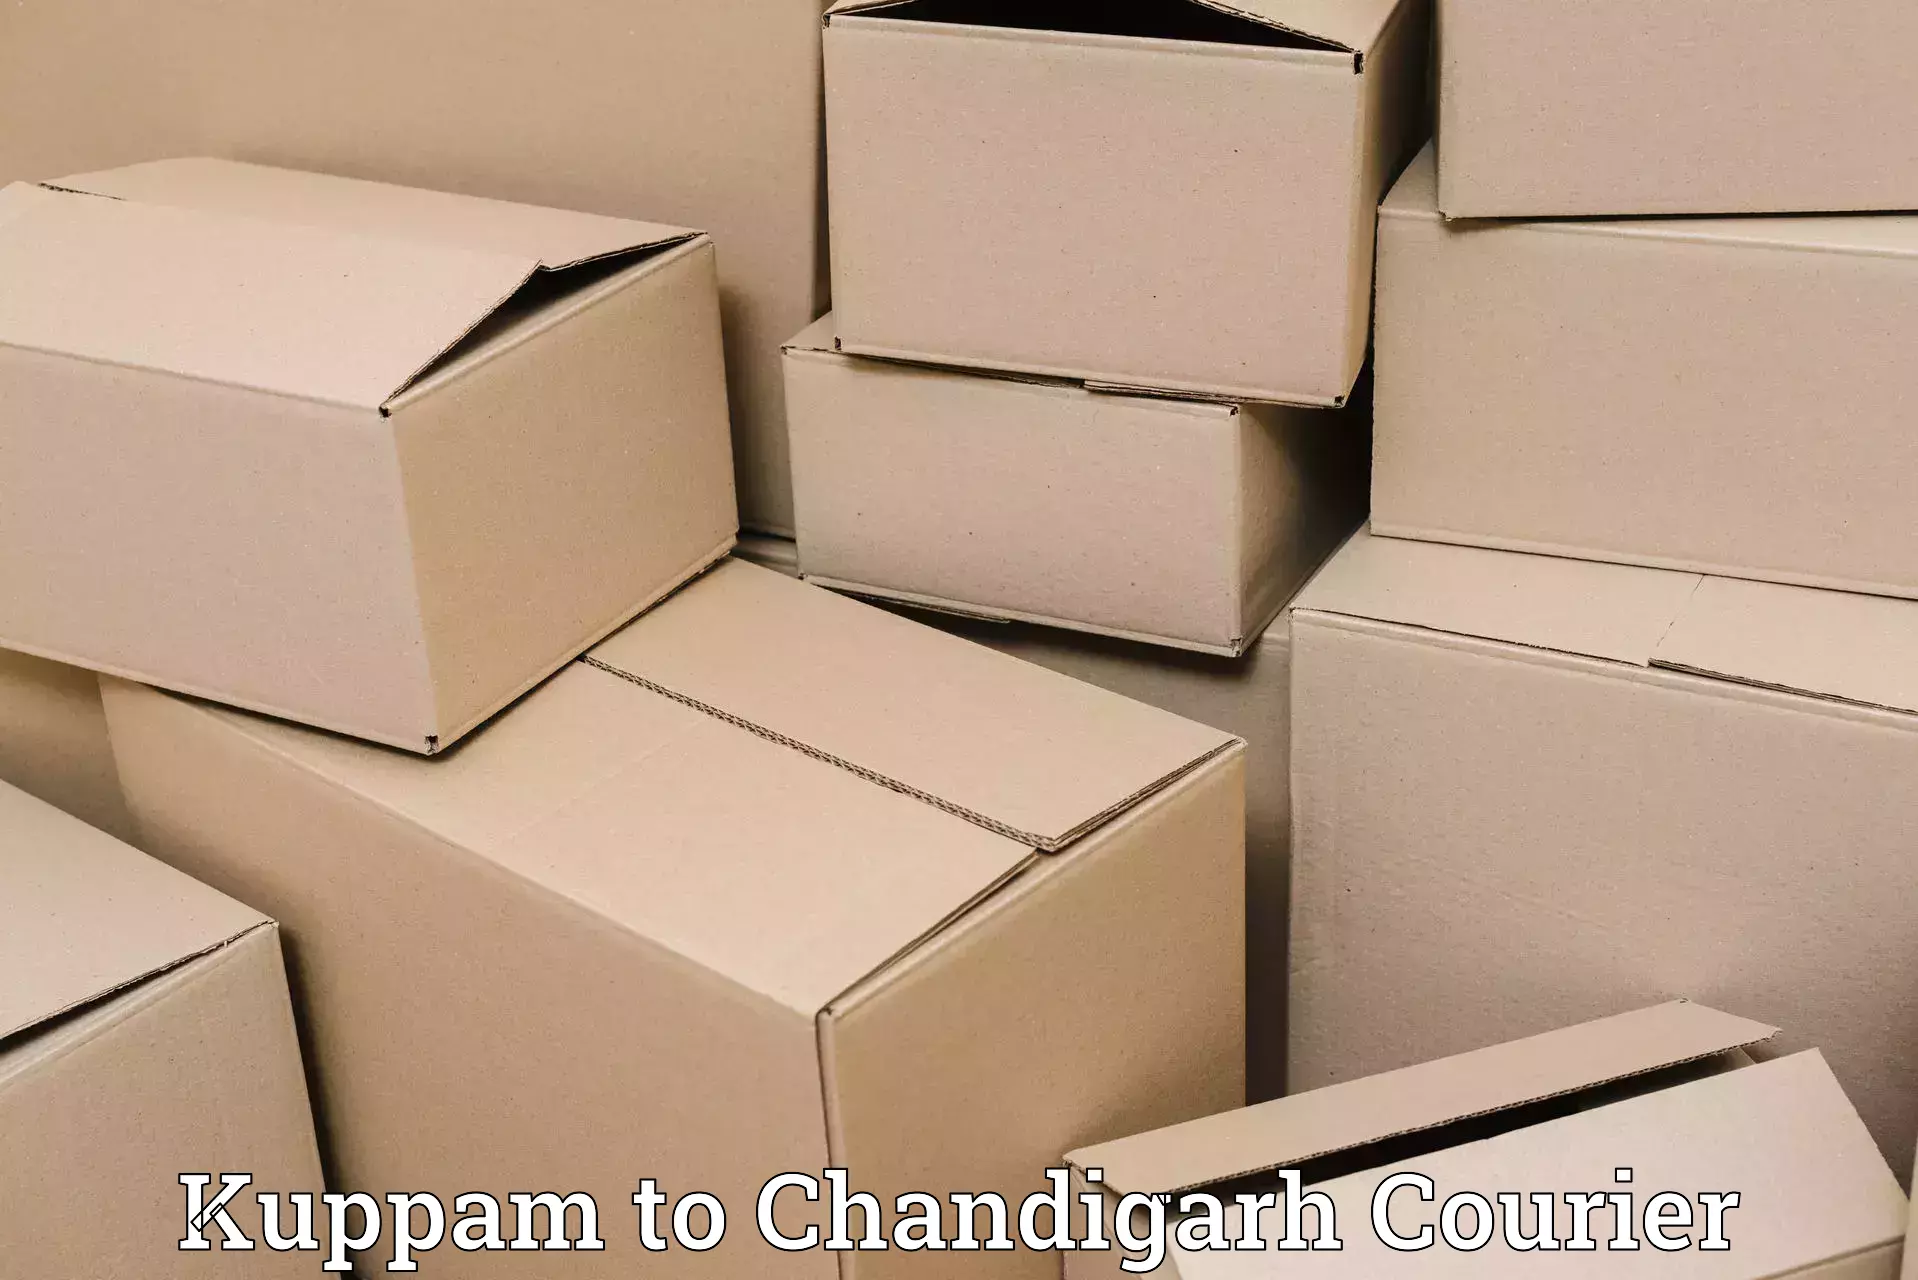 Secure packaging Kuppam to Chandigarh